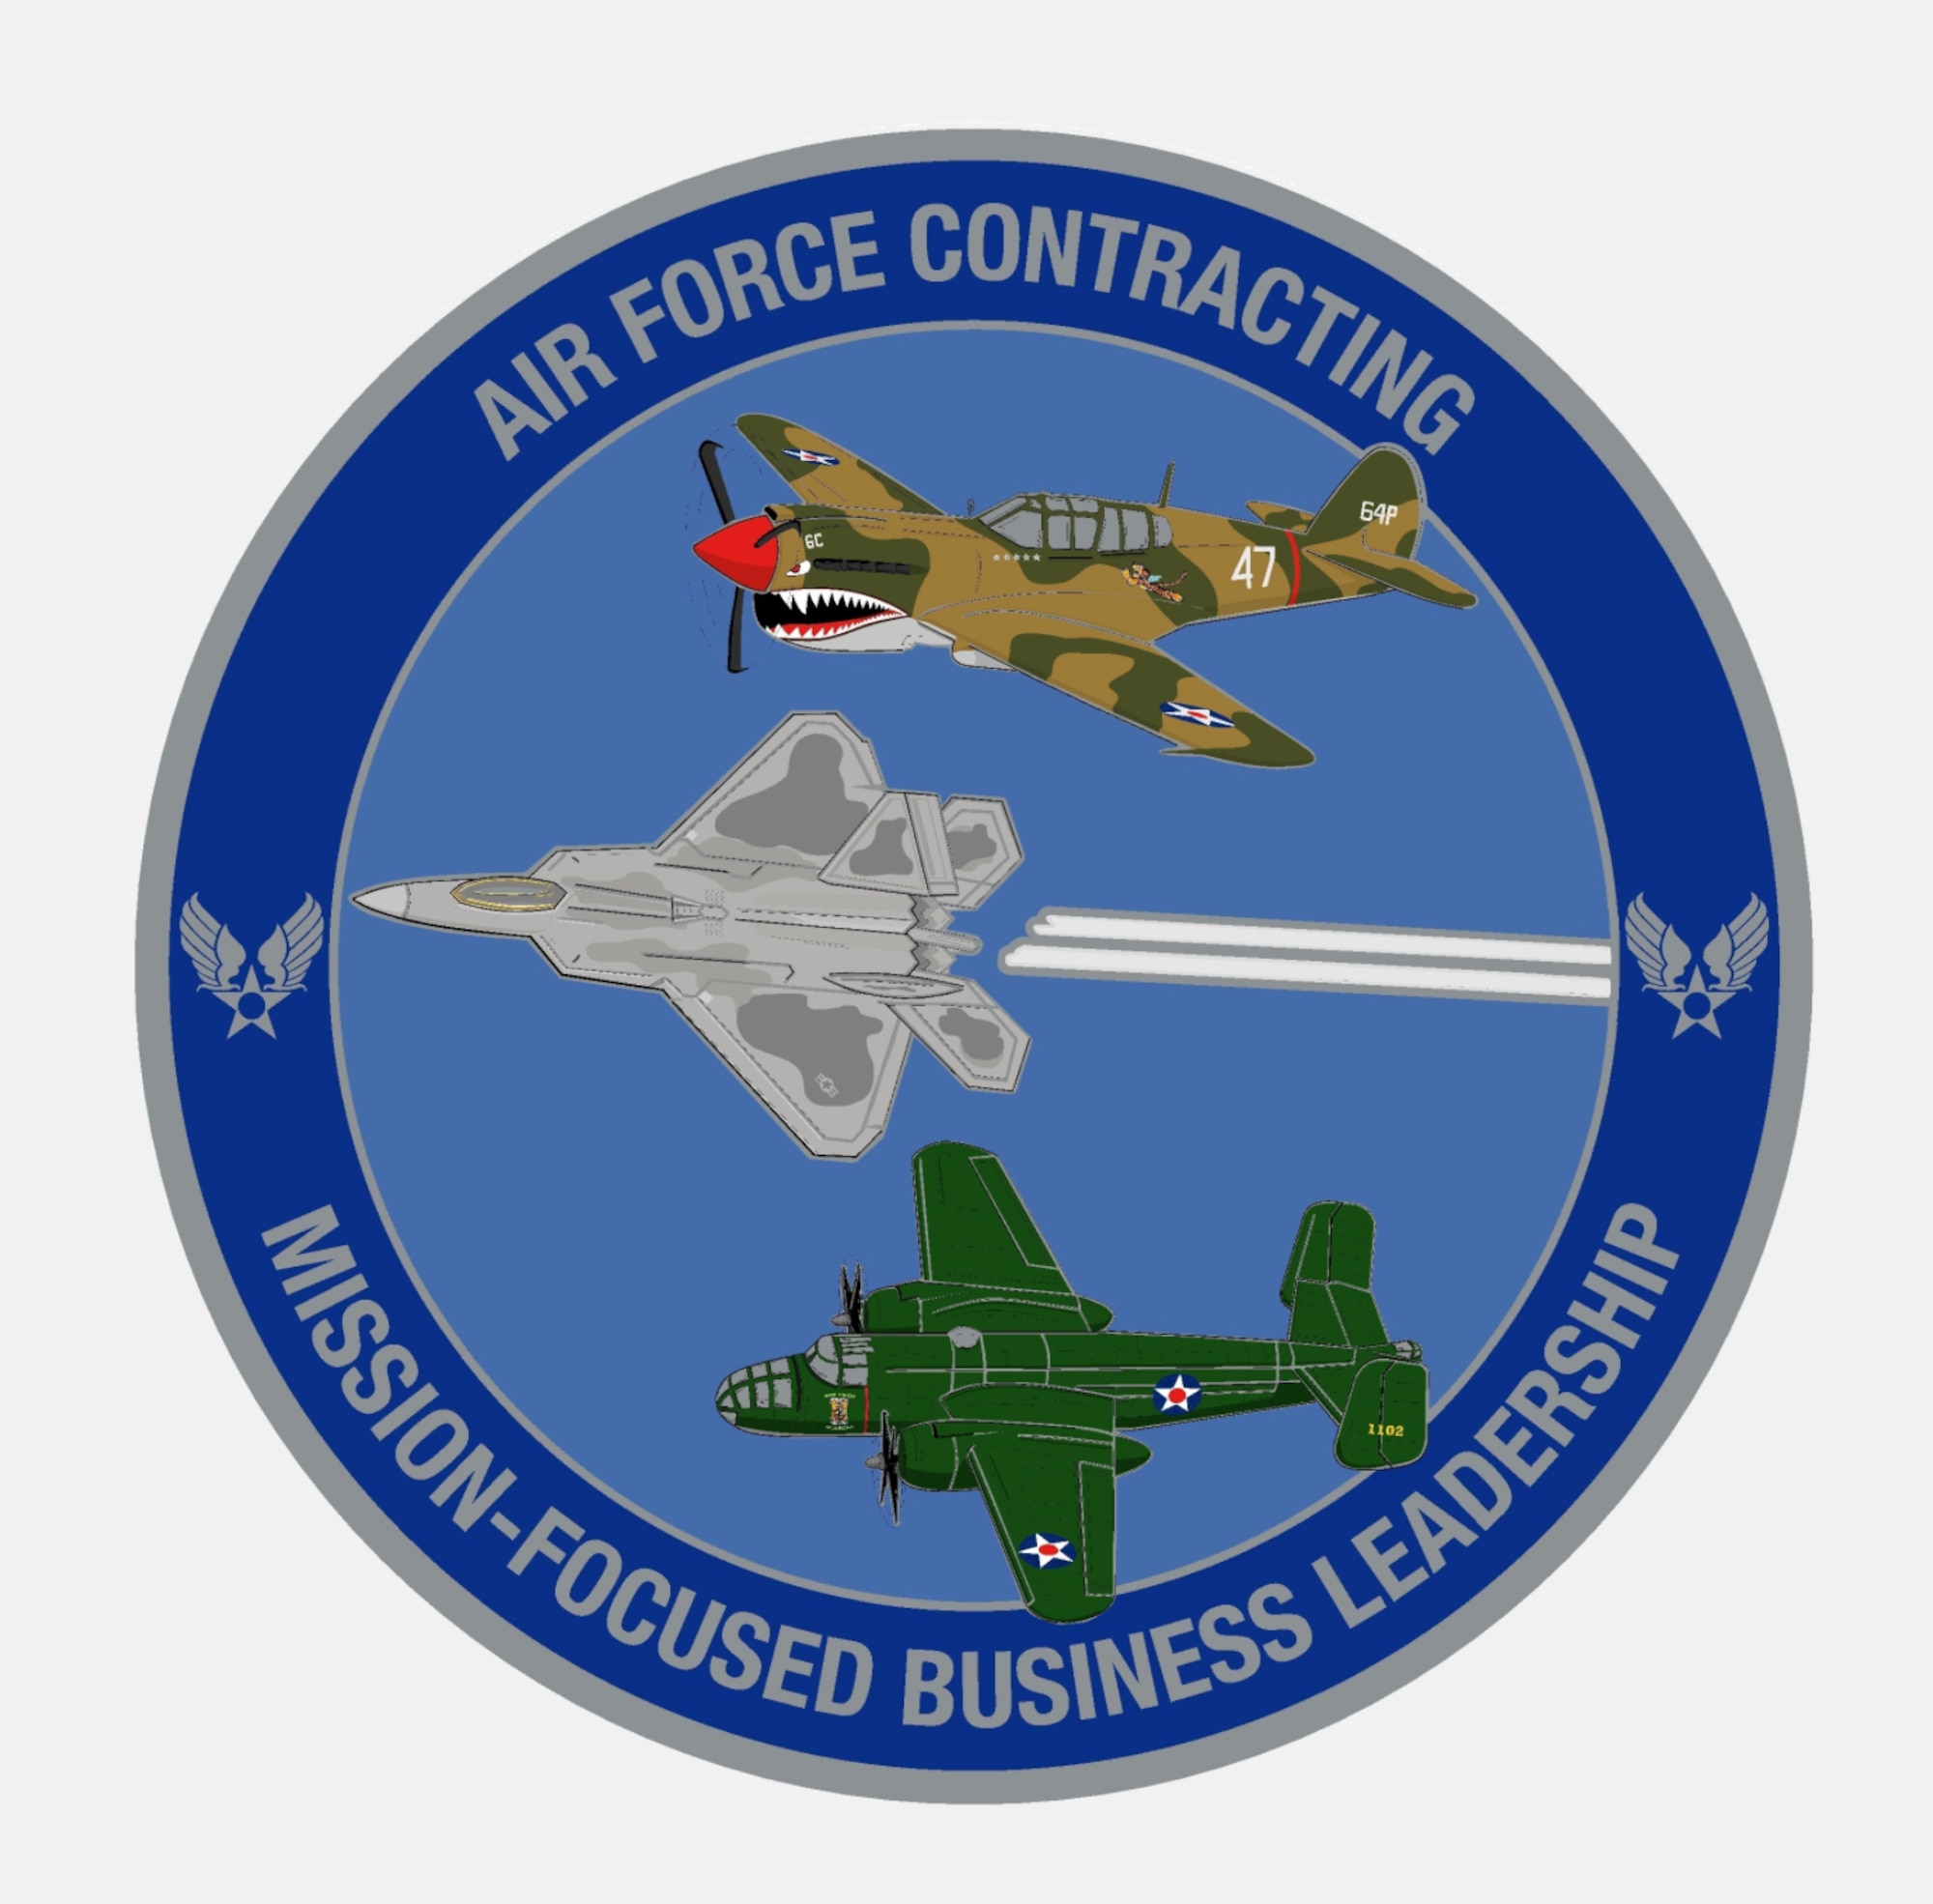 Air Force Contracting